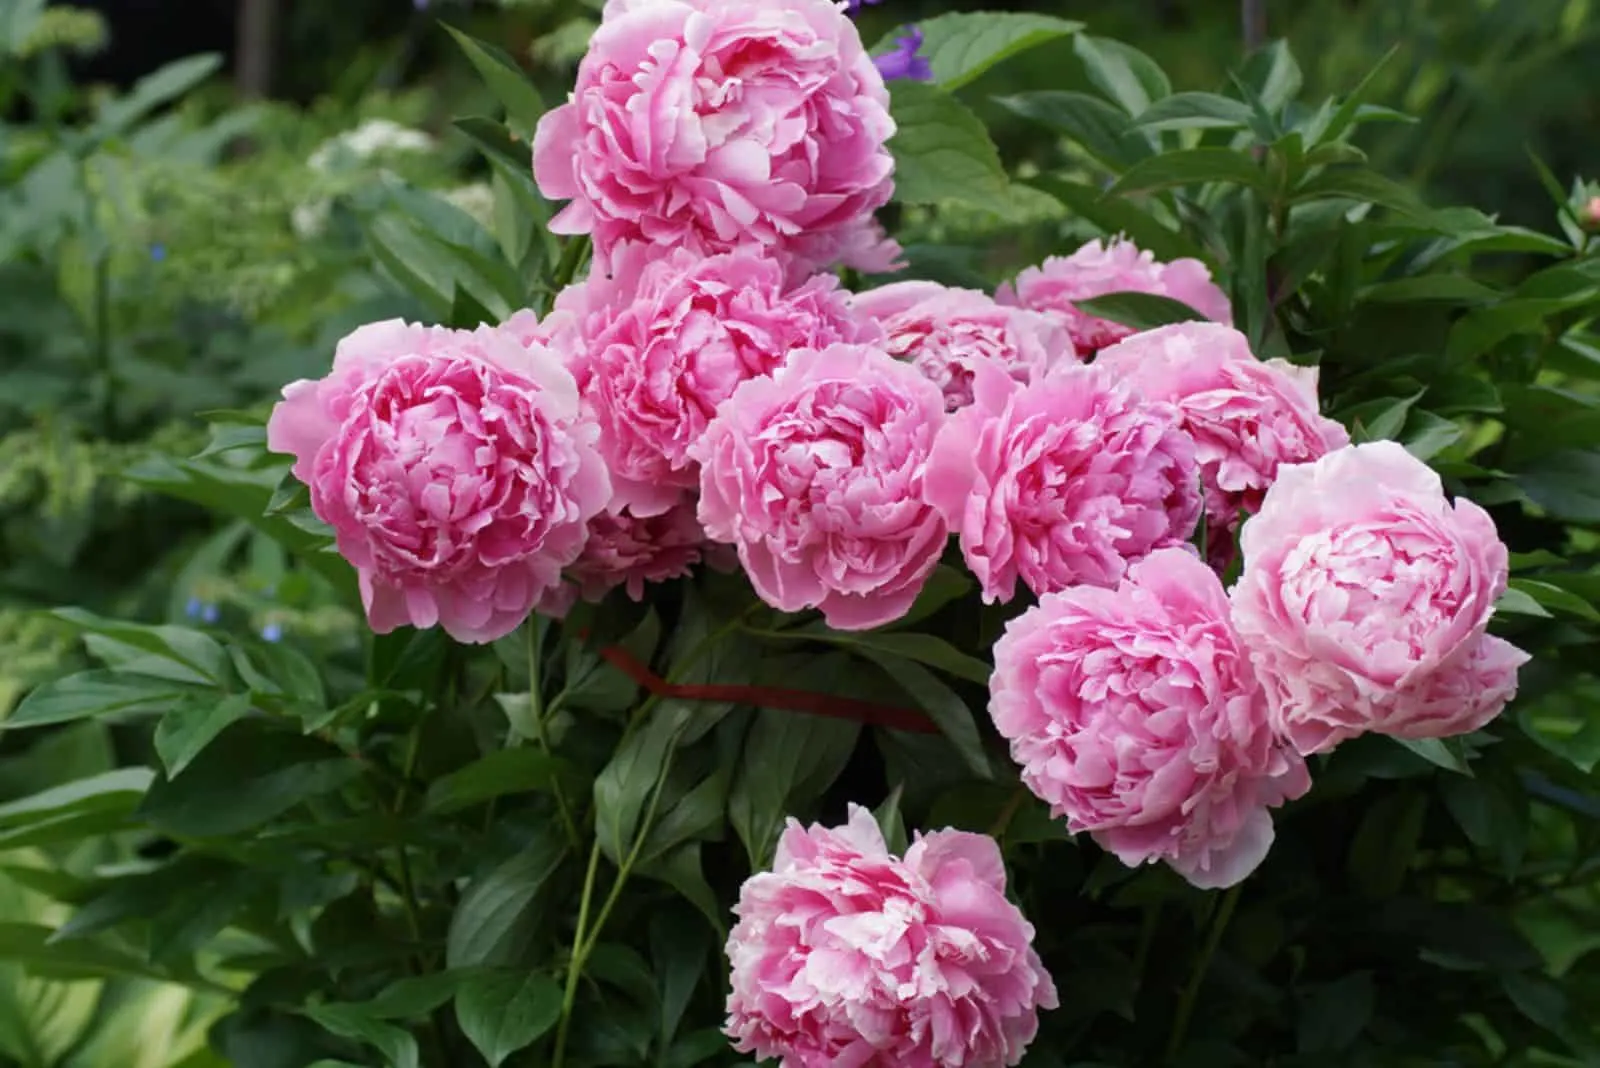 A bush of pink double peonies blooms in the garden